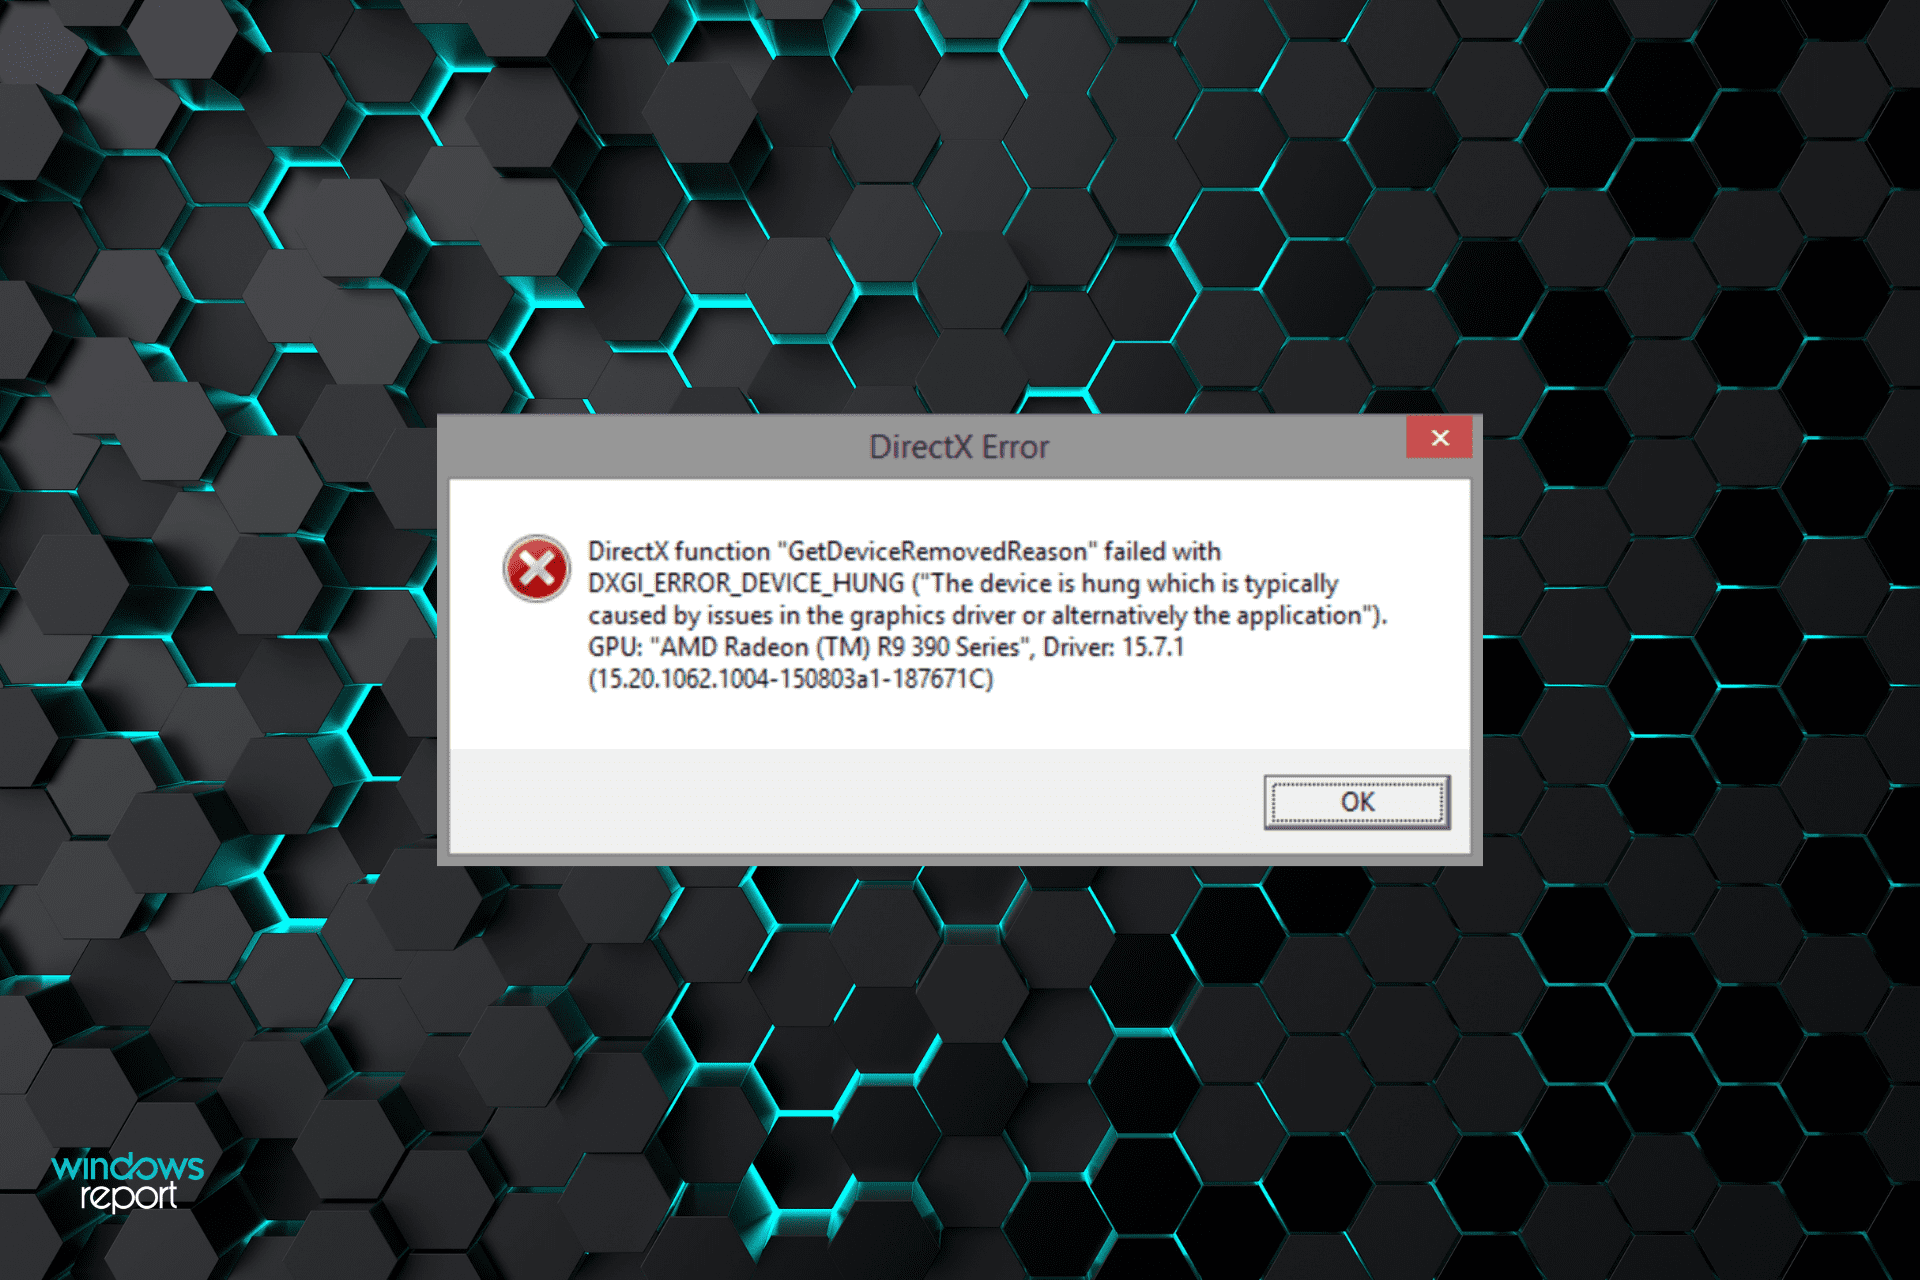 DirectX function "GetDeviceRemovedReason" failed with error